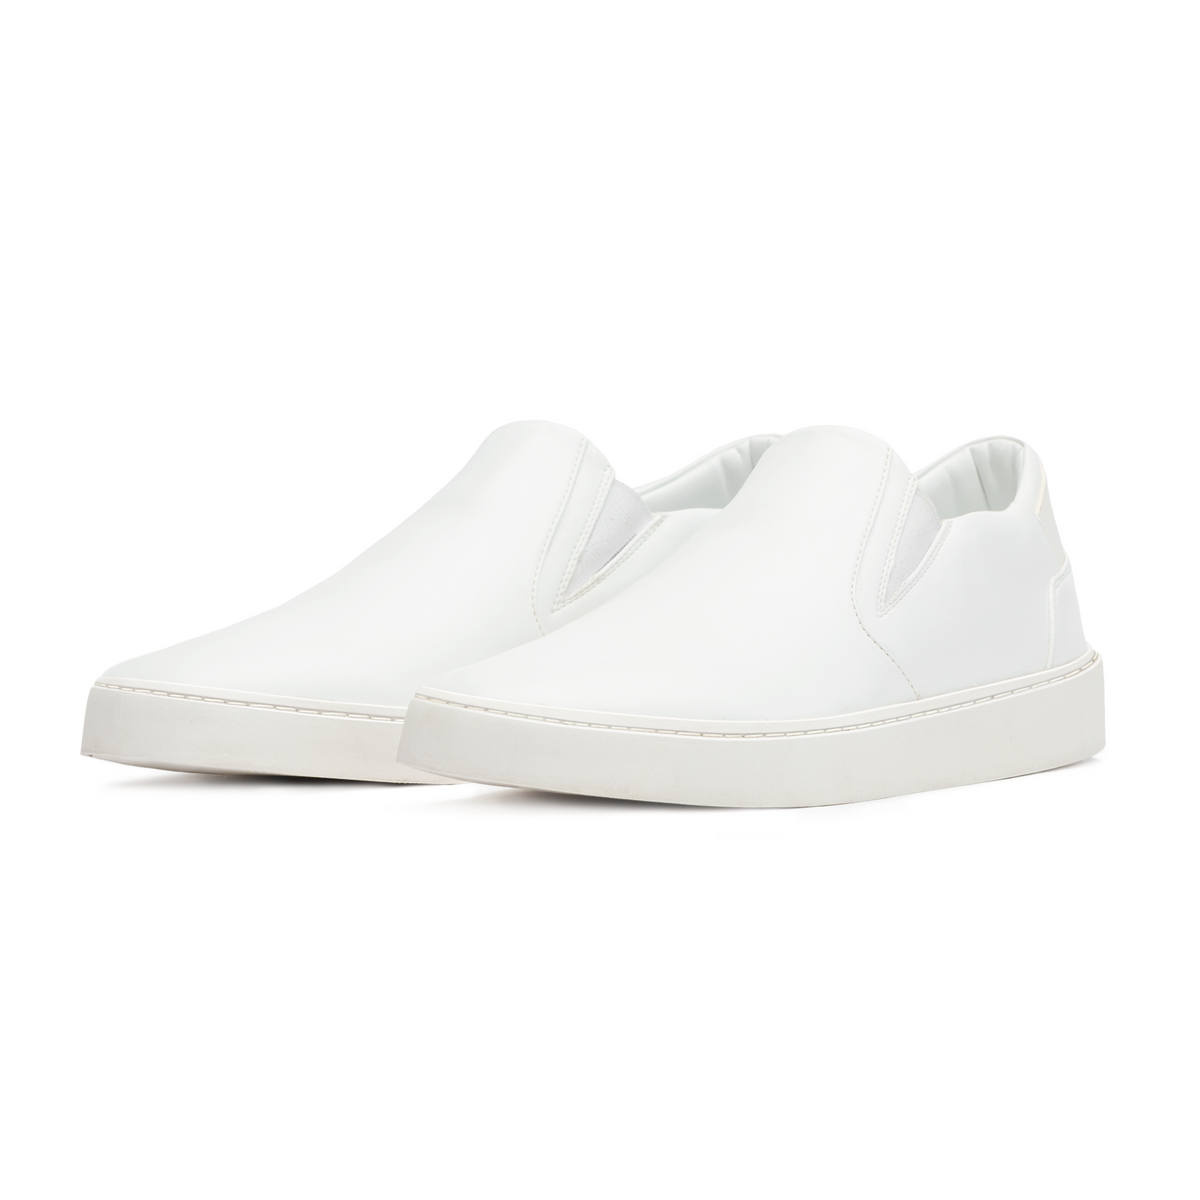 white slip on sneakers sustainably made